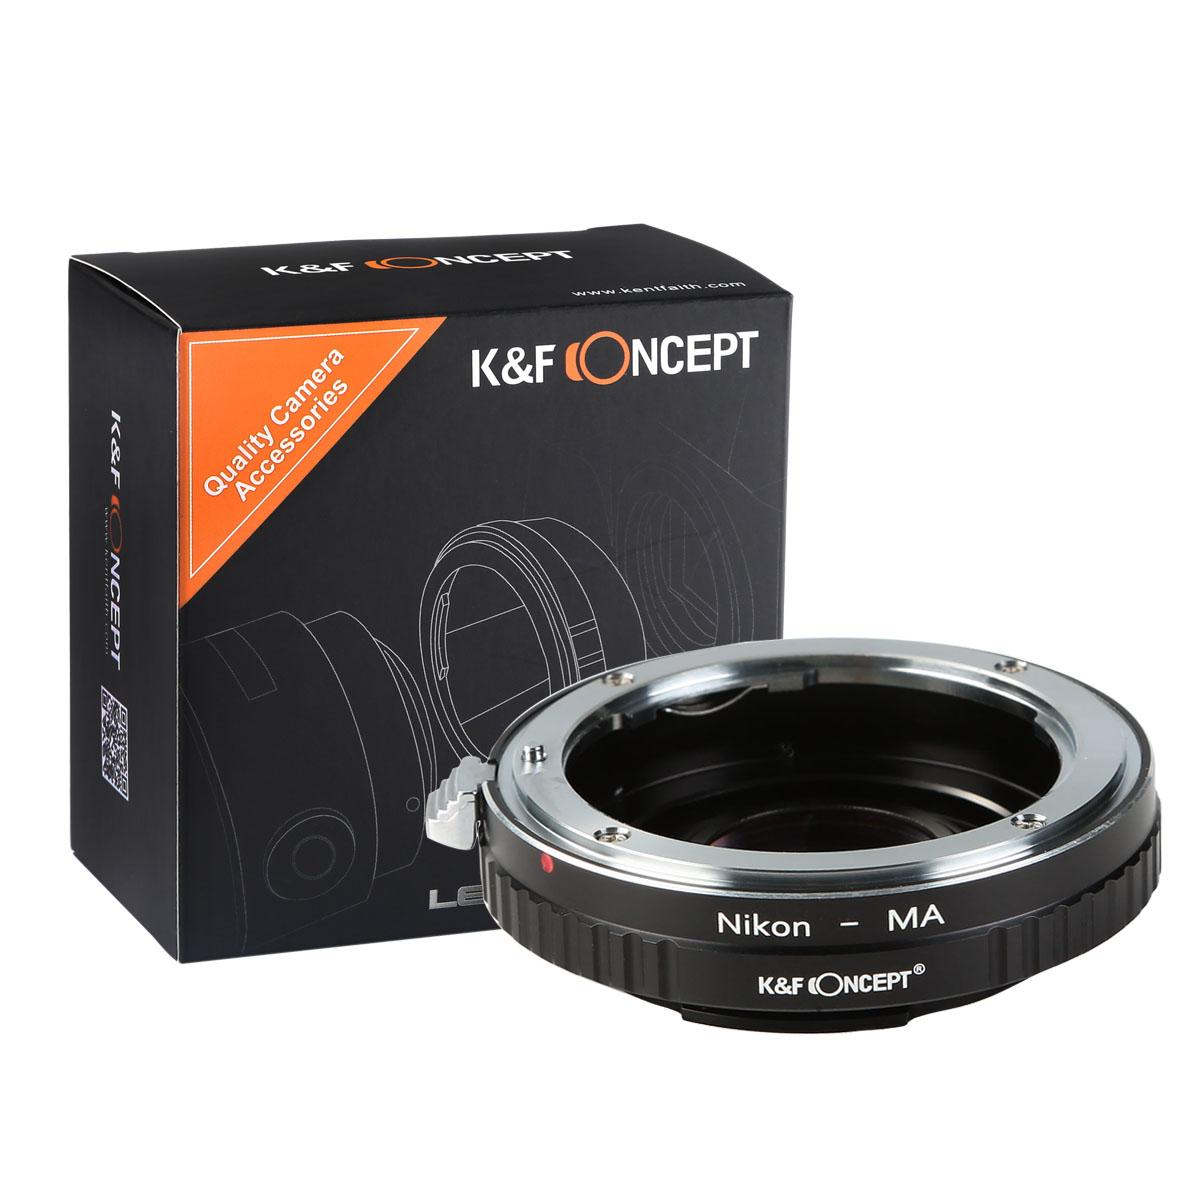 Nikon F Lenses to Sony A Lens Mount Adapter with Optic Glass K&F Concept M11331 Lens Adapter